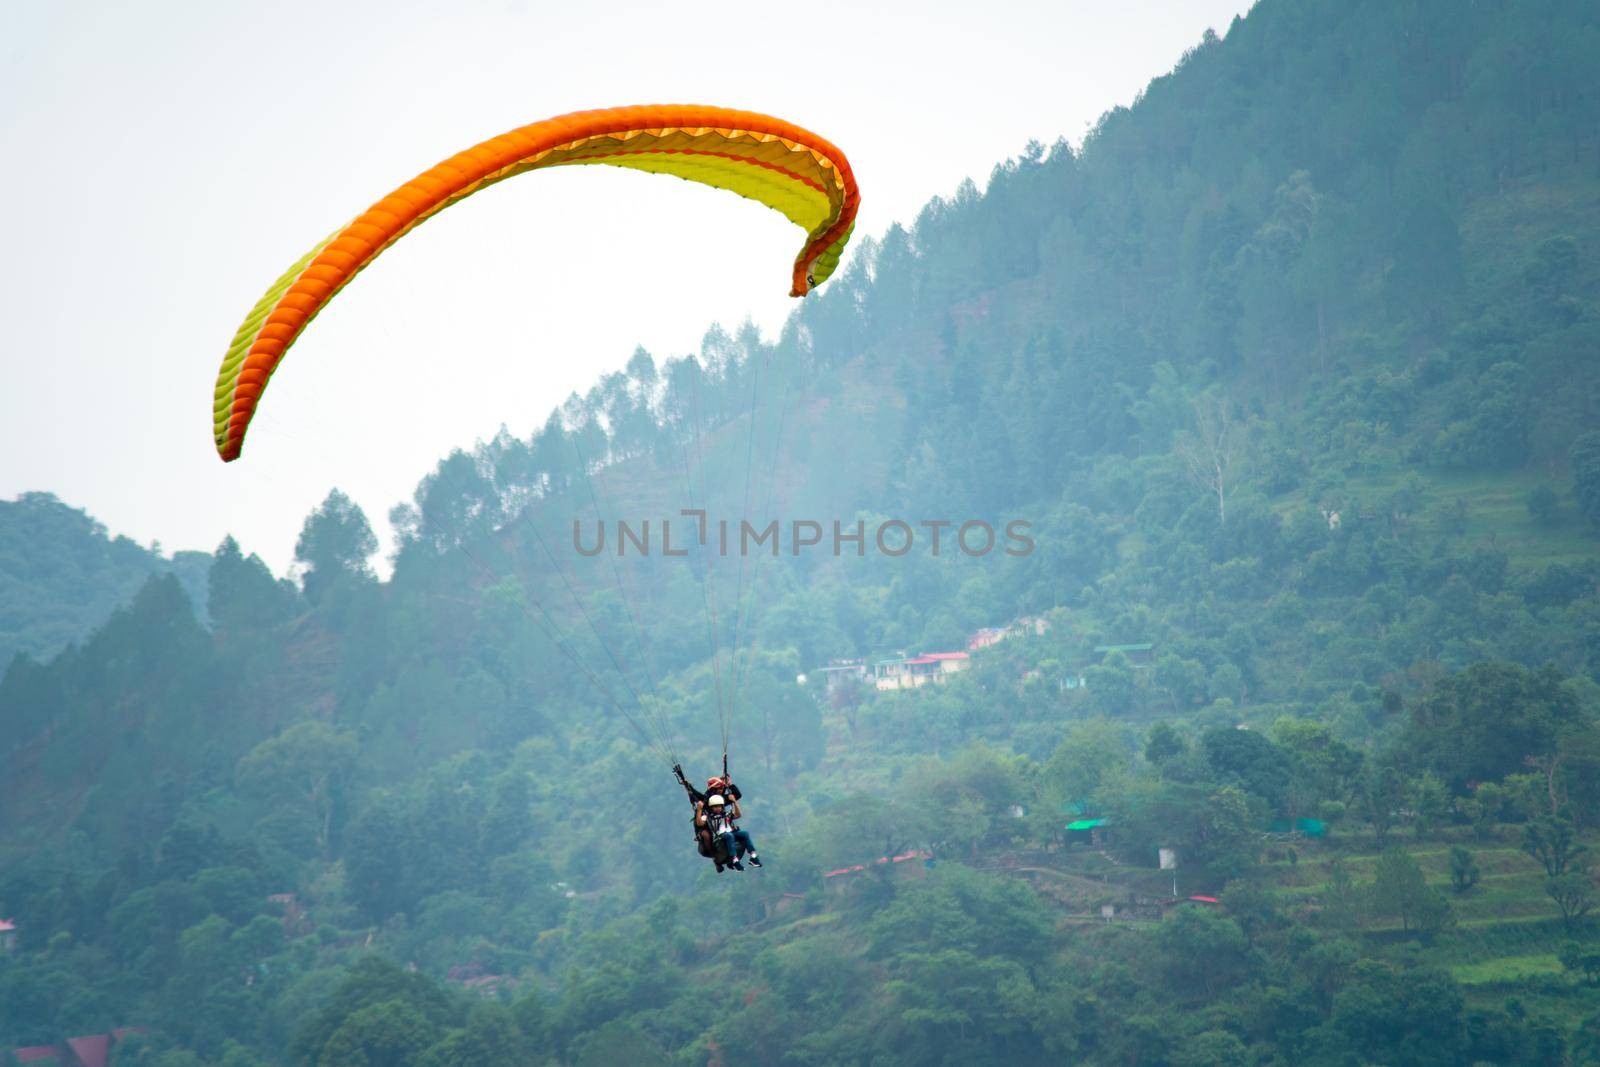 para gliding people with a bright orange yellow glider in the middle of hills mountains near nanital bir billing showing a popular adventure sport for tourists by Shalinimathur